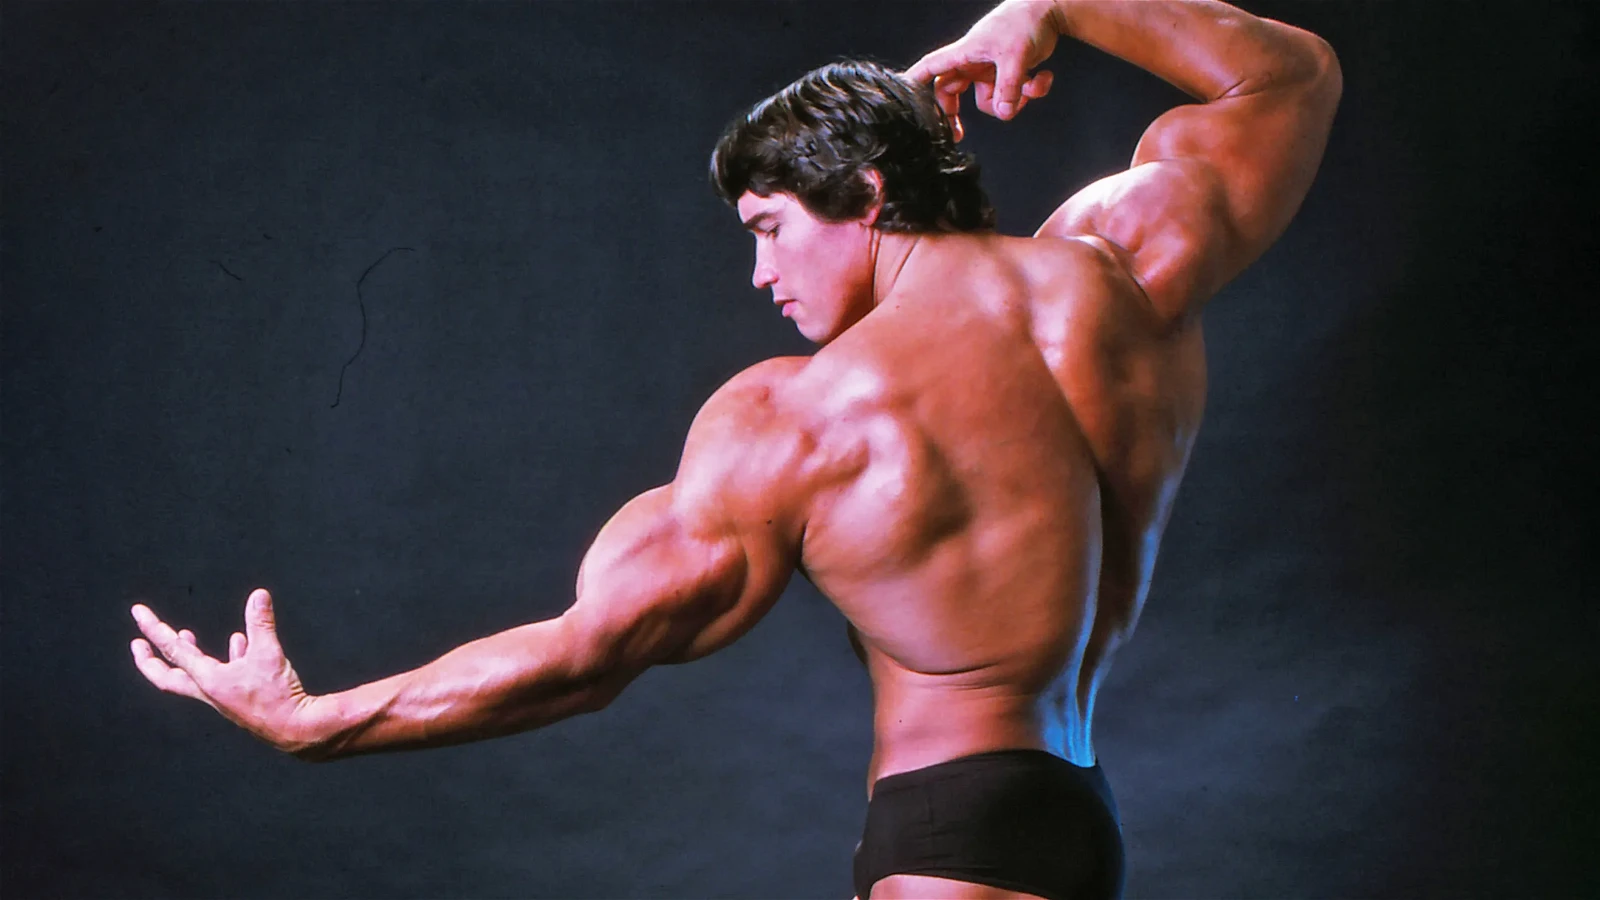 5 Facts You Didn't Know About Mr. Olympia Bodybuilding